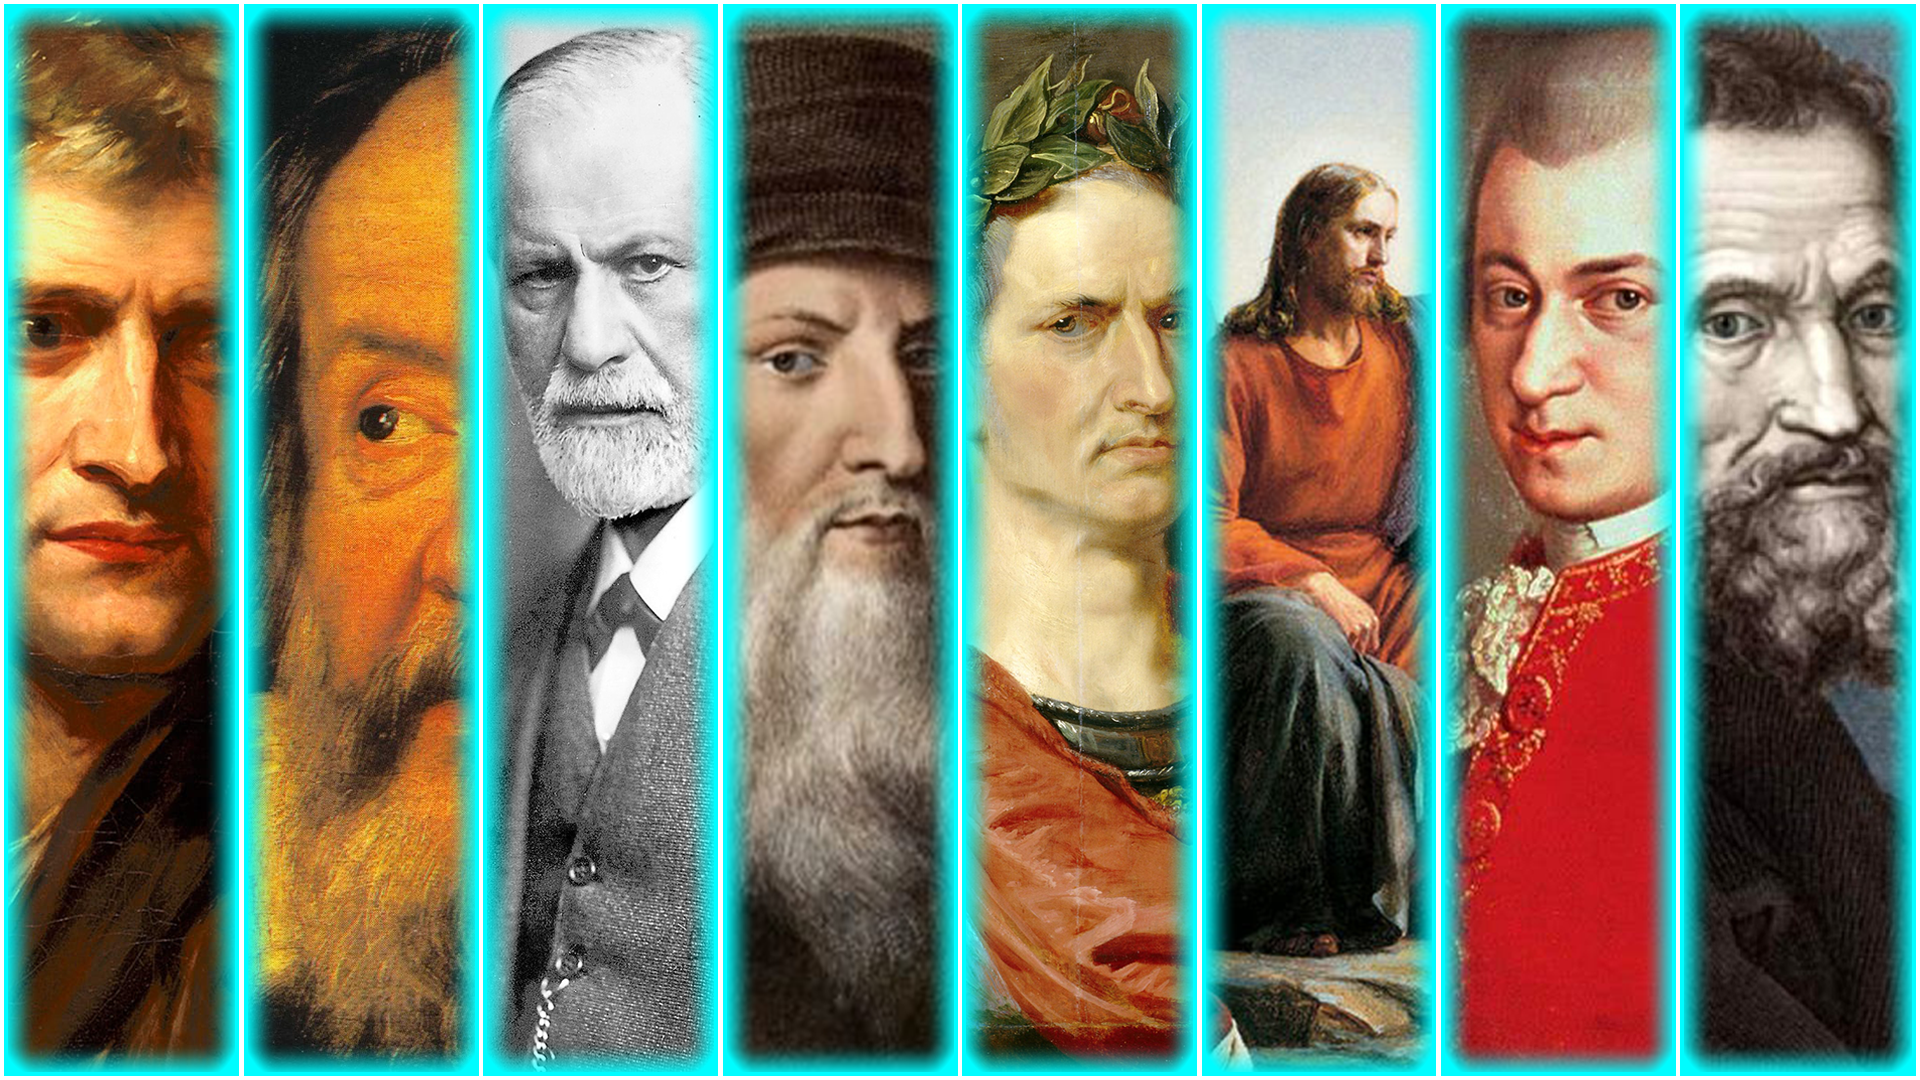 15 Most Infuential People in History - Cover